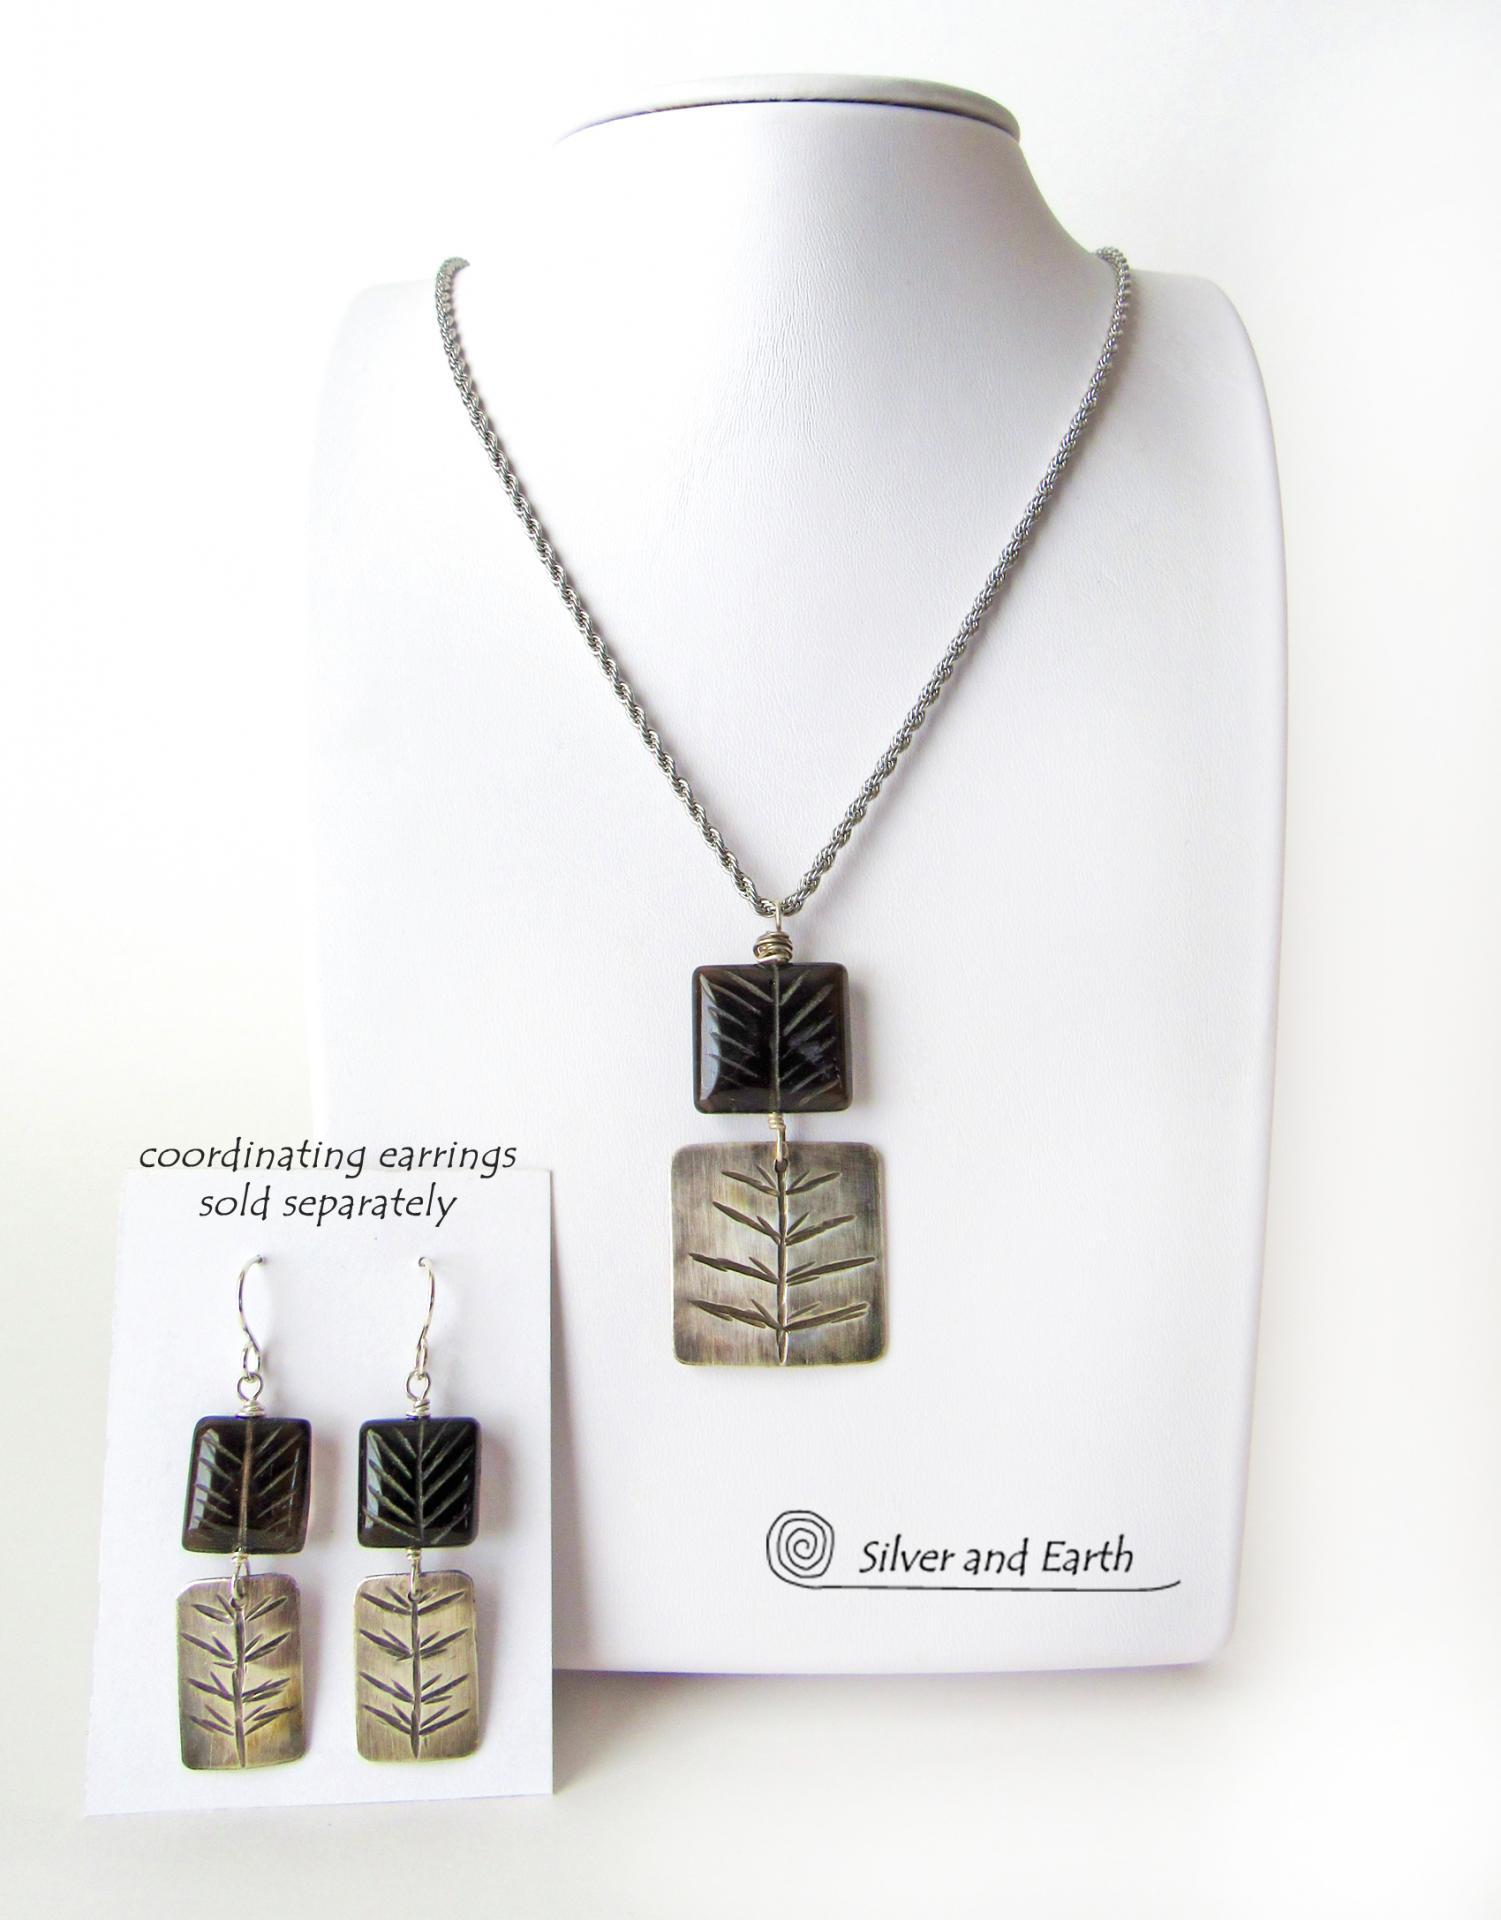 Smoky Quartz Sterling Silver Pendant Necklace with Hand Stamped Twig Pattern - Earthy Nature Jewelry